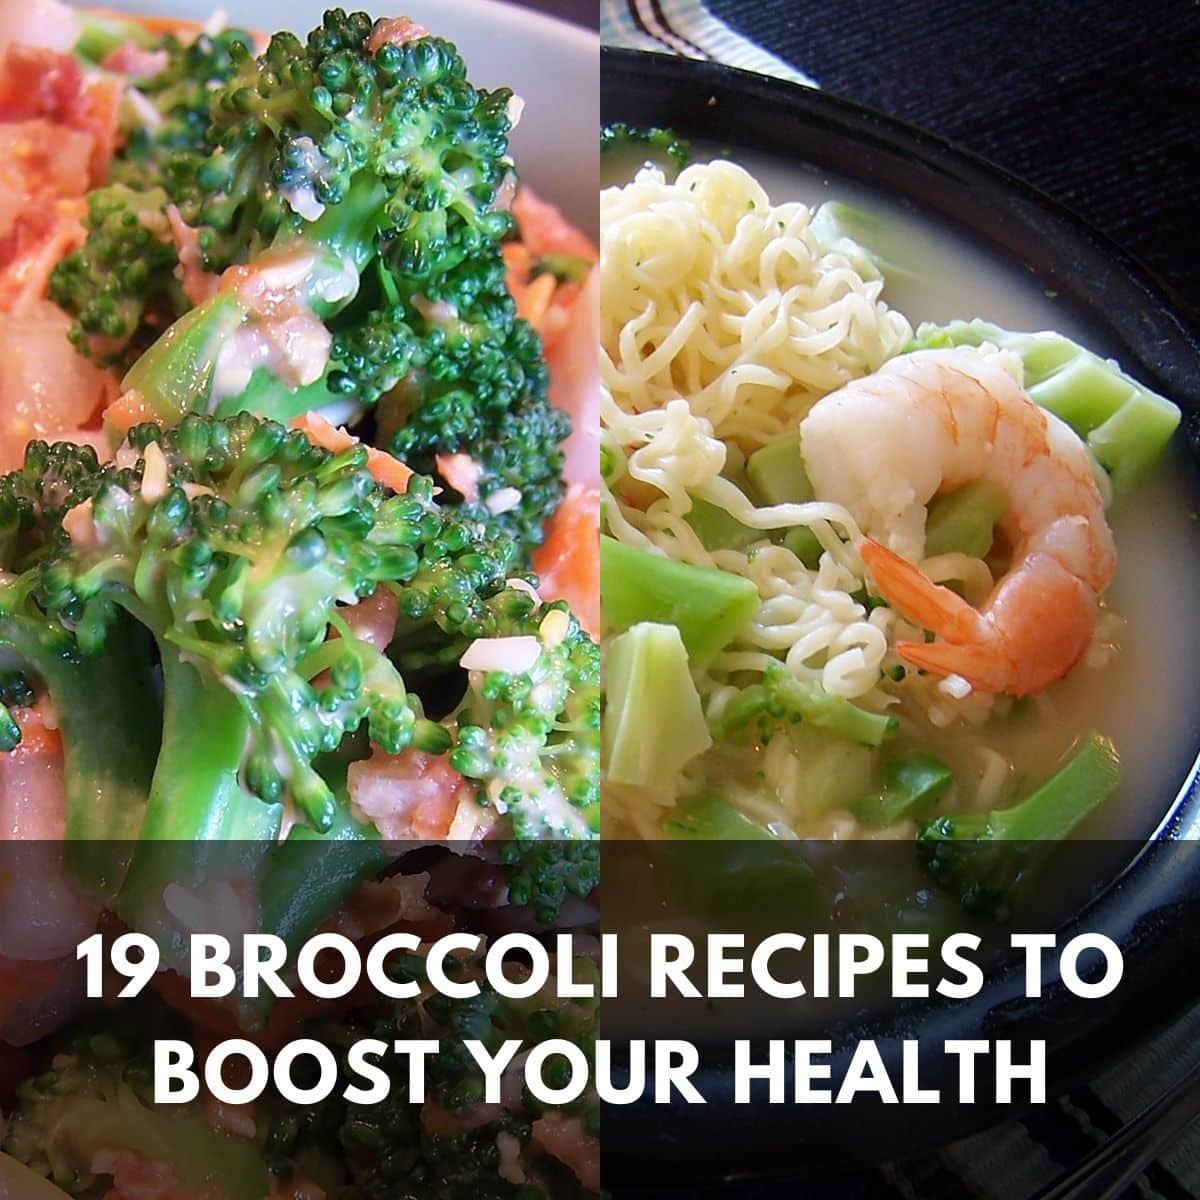 19 broccoli recipes to boost your health main